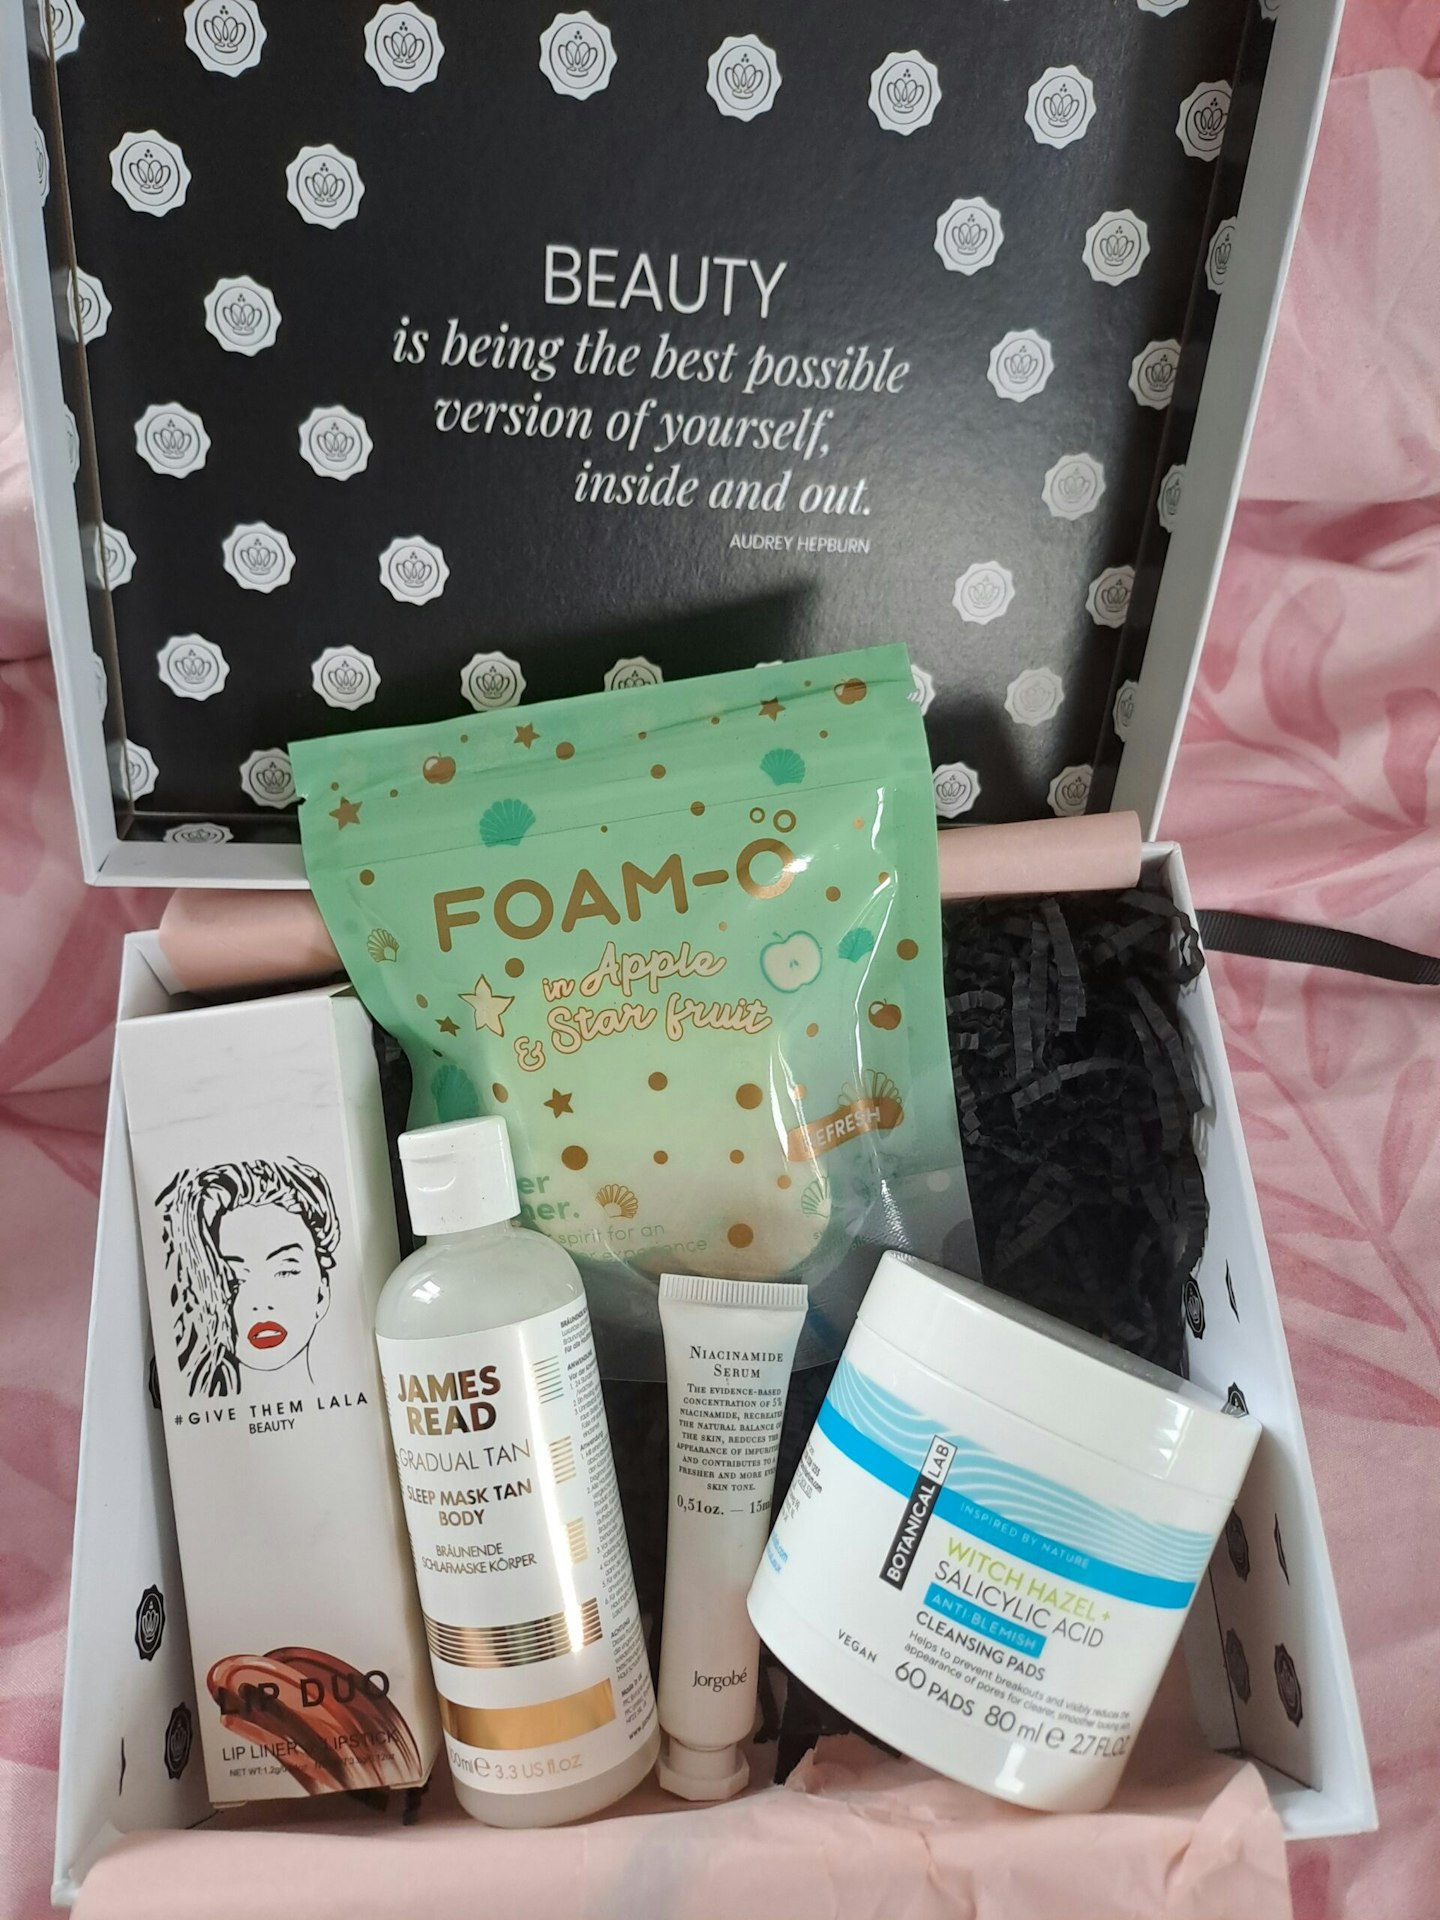 Glossybox with products